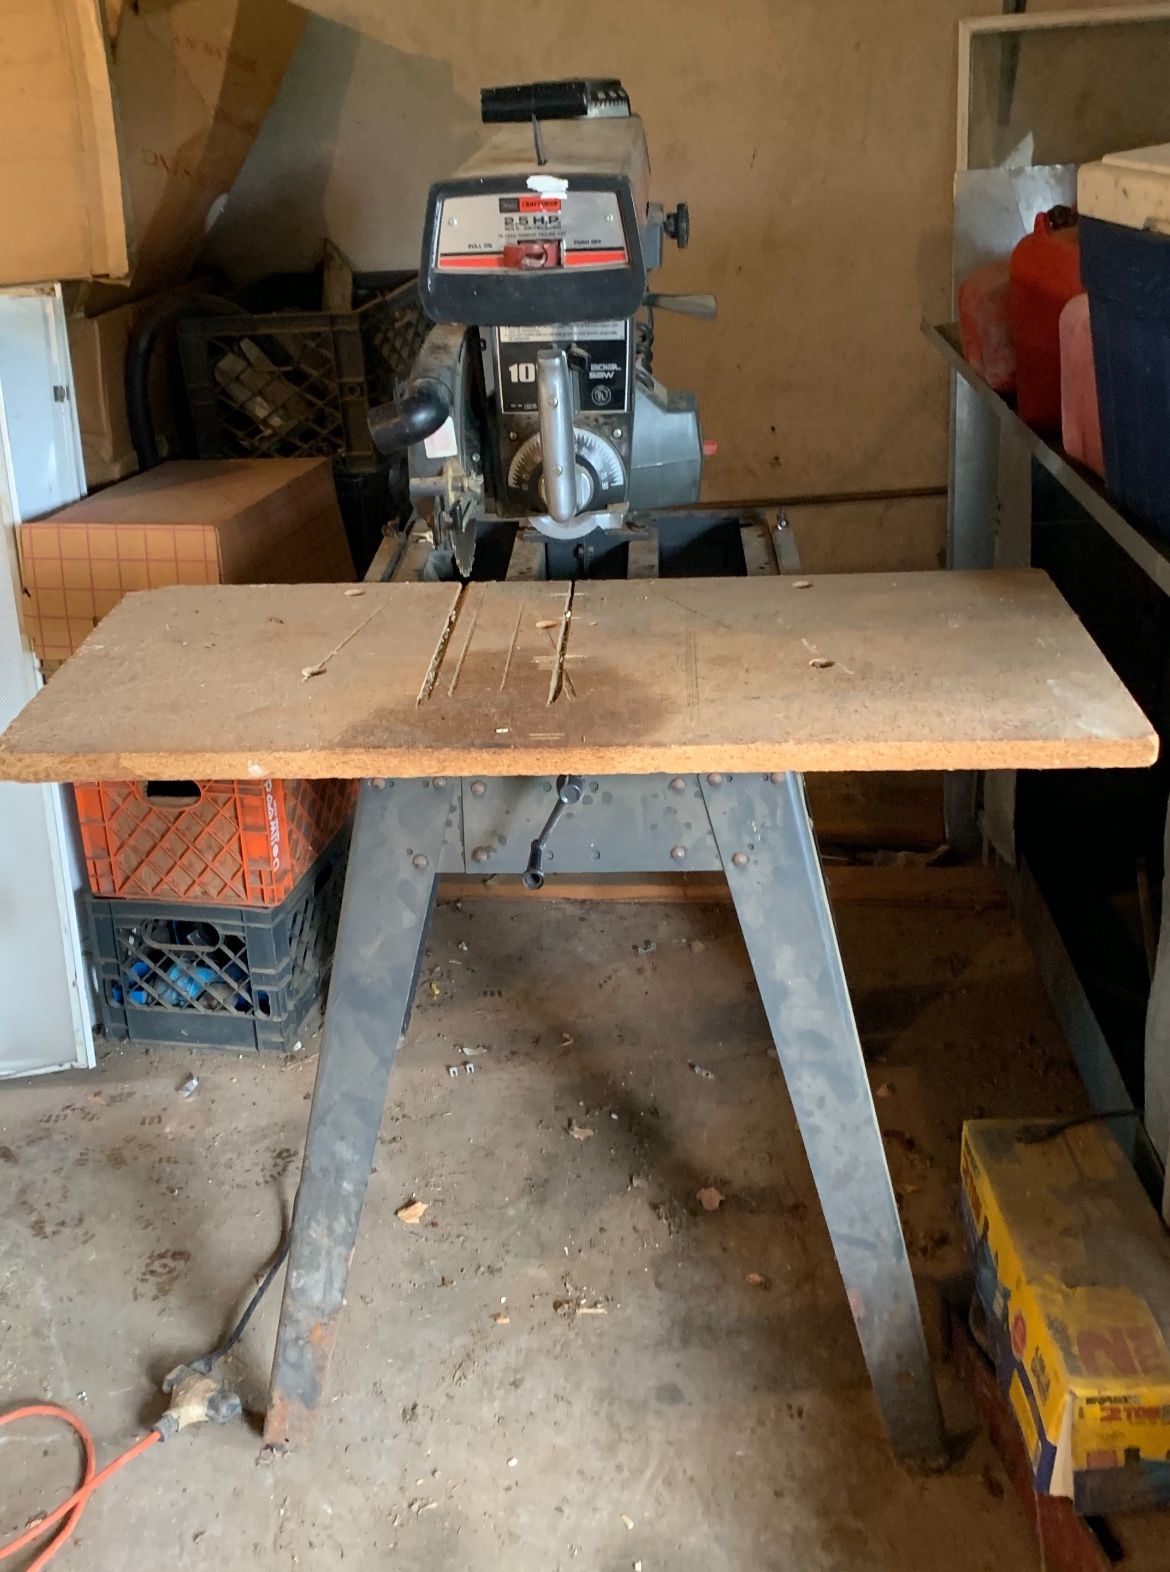 Used Only Twice! 10” Radial Saw 2.5 Hp Craftsman 